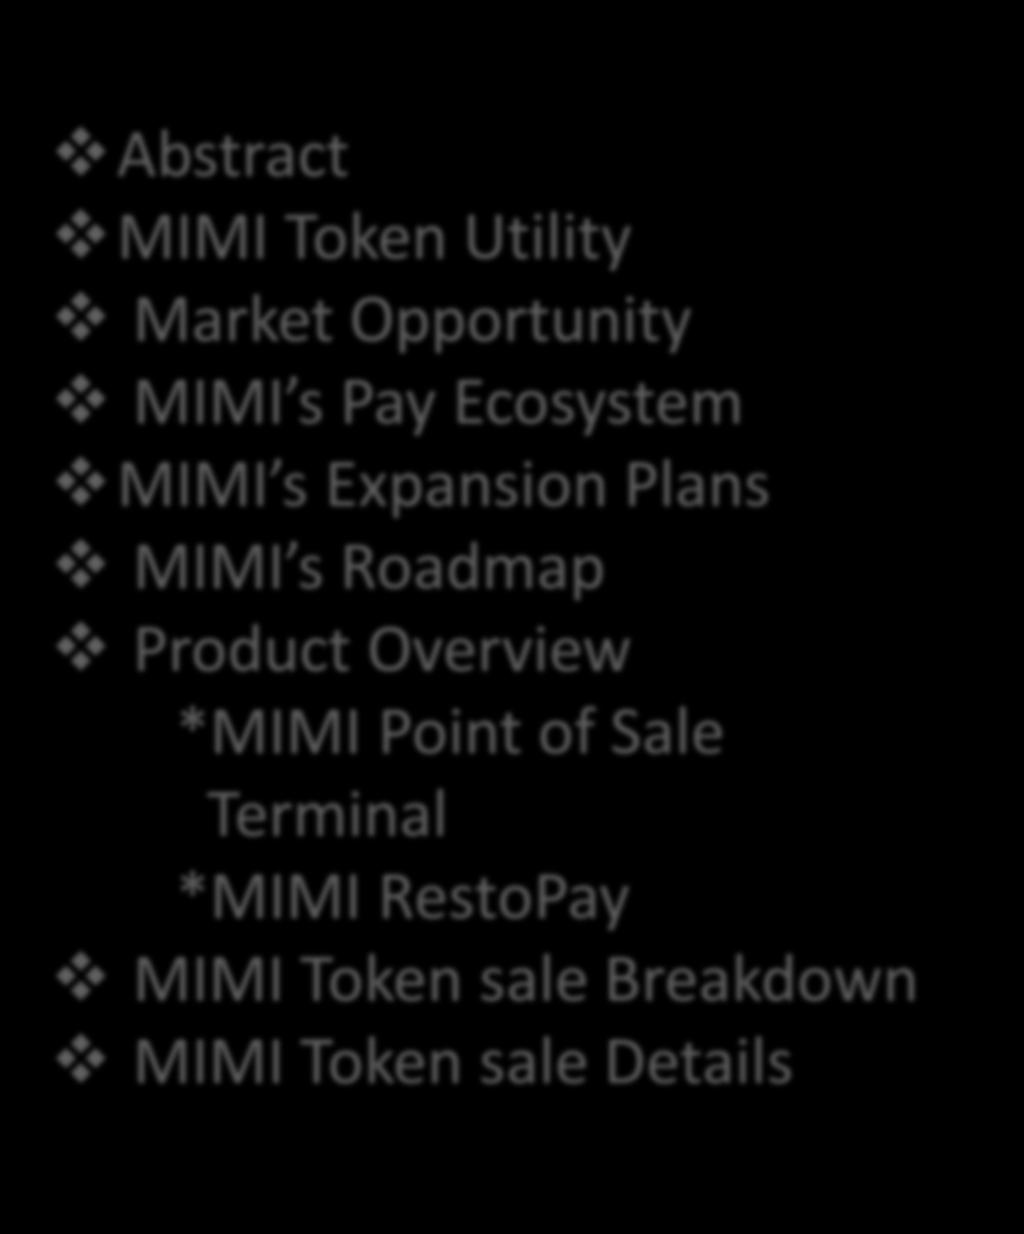 Roadmap Product Overview *MIMI Point of Sale Terminal